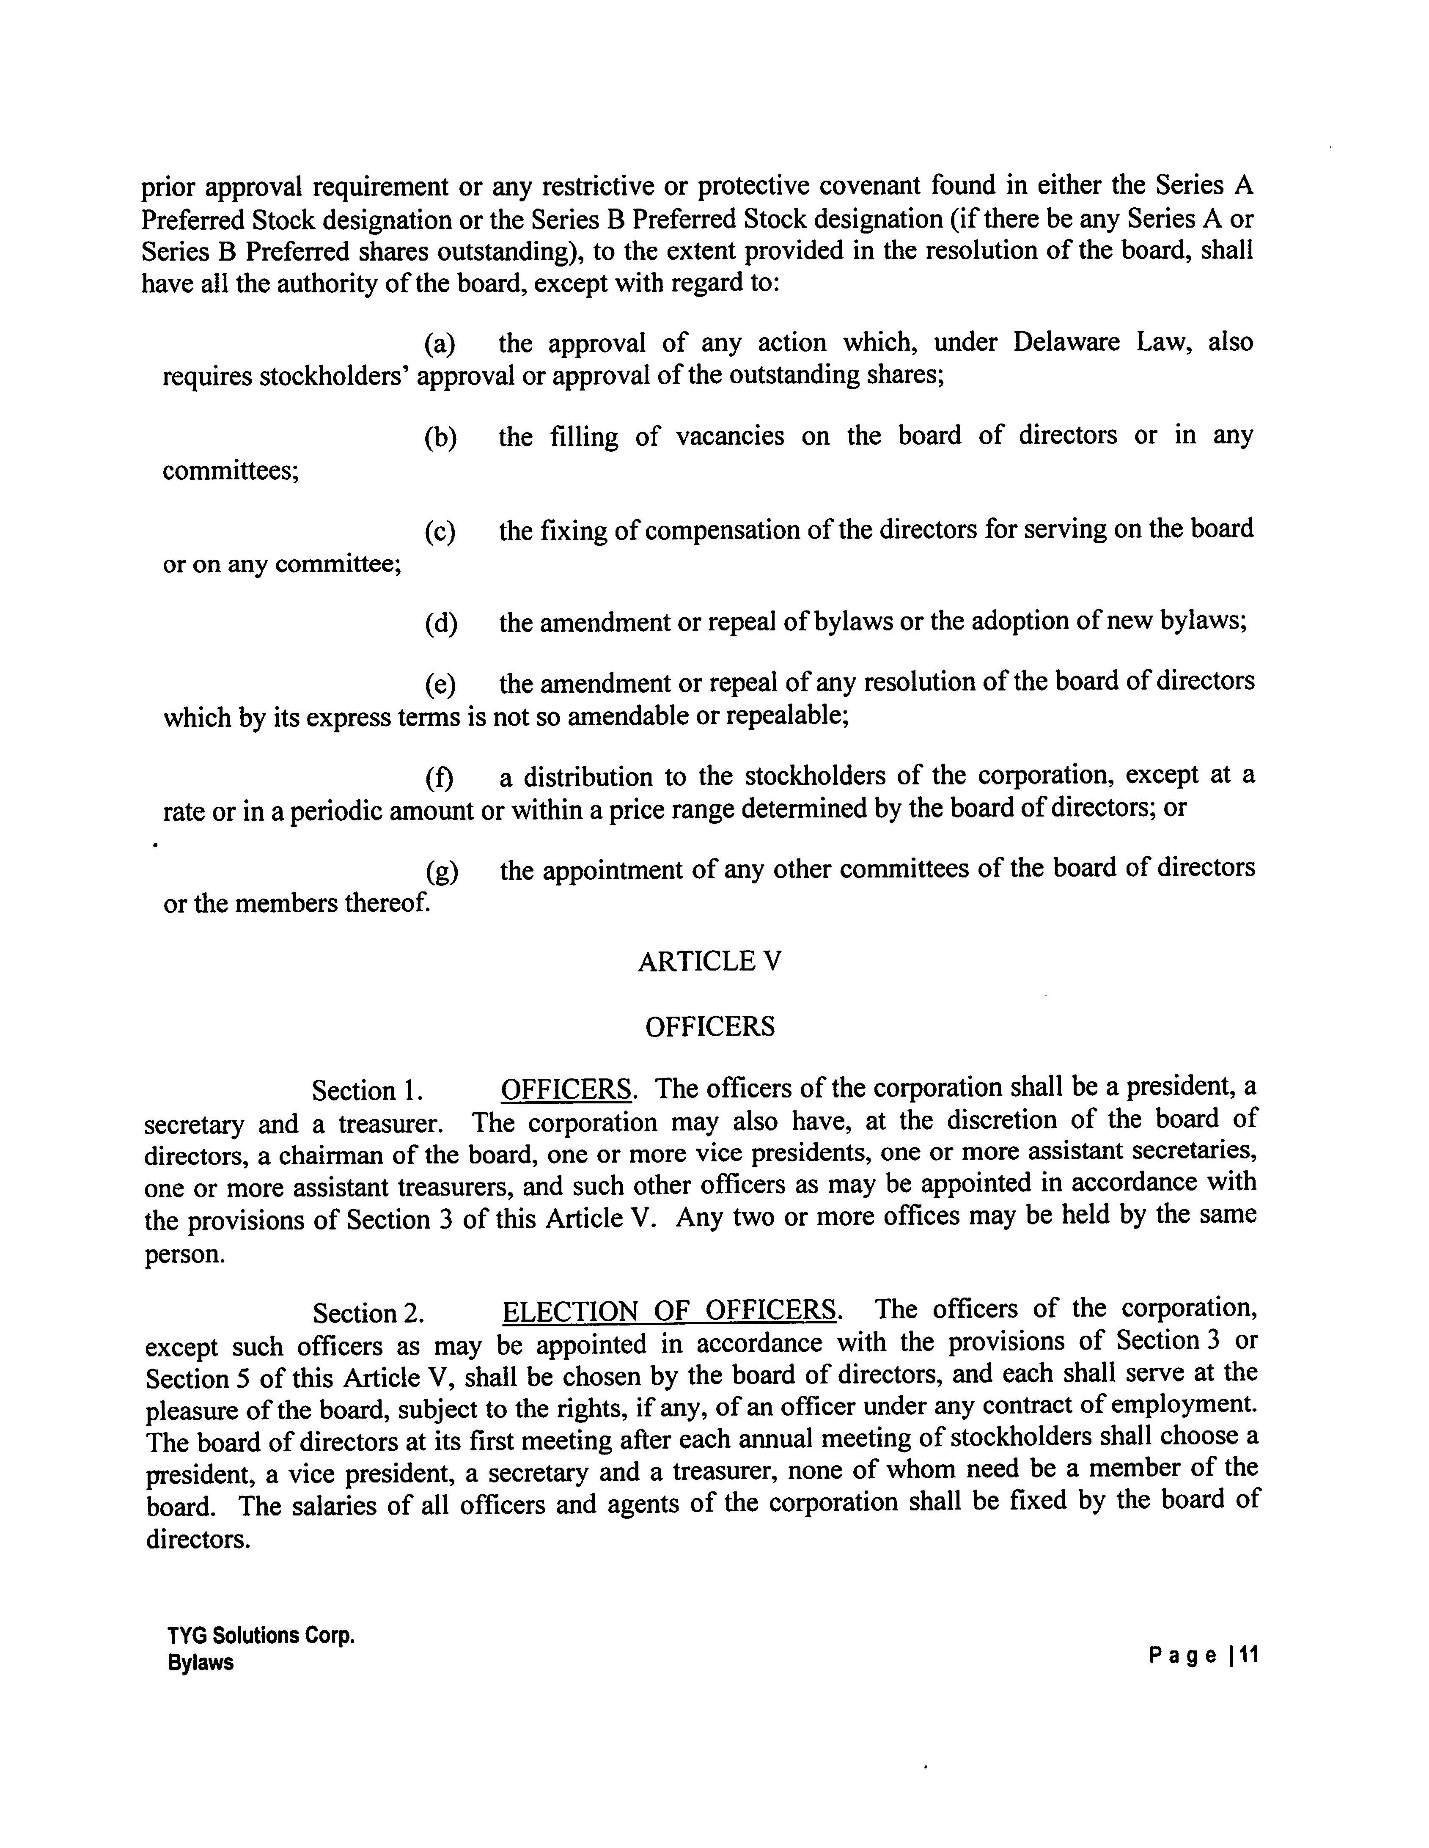 Ex. 3.3 Amended Articles and Bylaws_Page_11.jpg